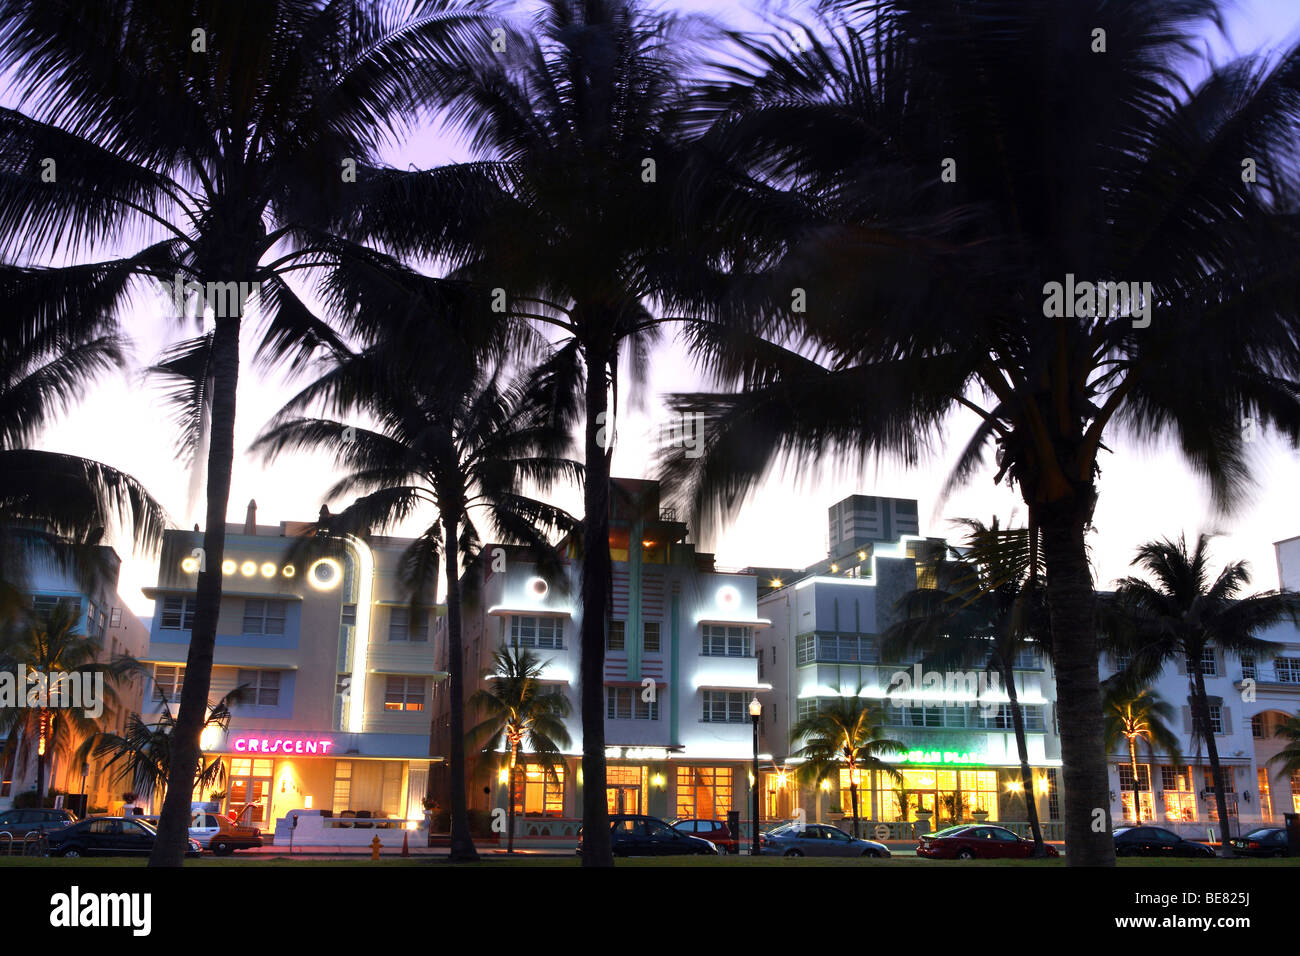 Palm trees in front of illuminated hotels in the evening, Ocean Drive, South Beach, Miami Beach, Florida, USA Stock Photo